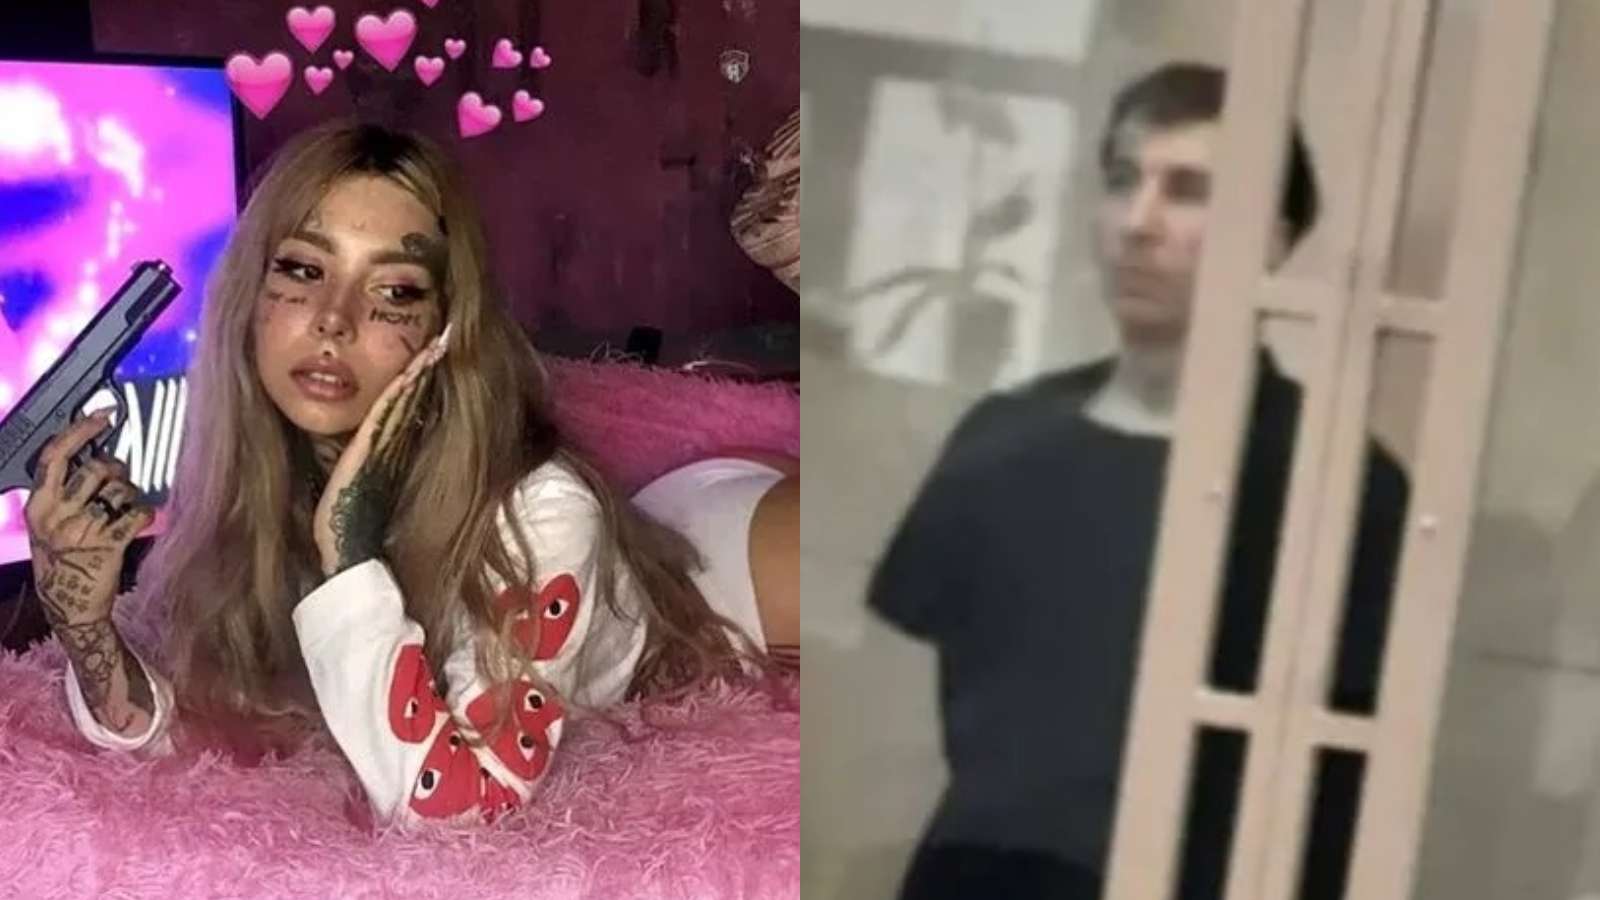 onlyfans model Anastasia Grishman and her husband behind bars